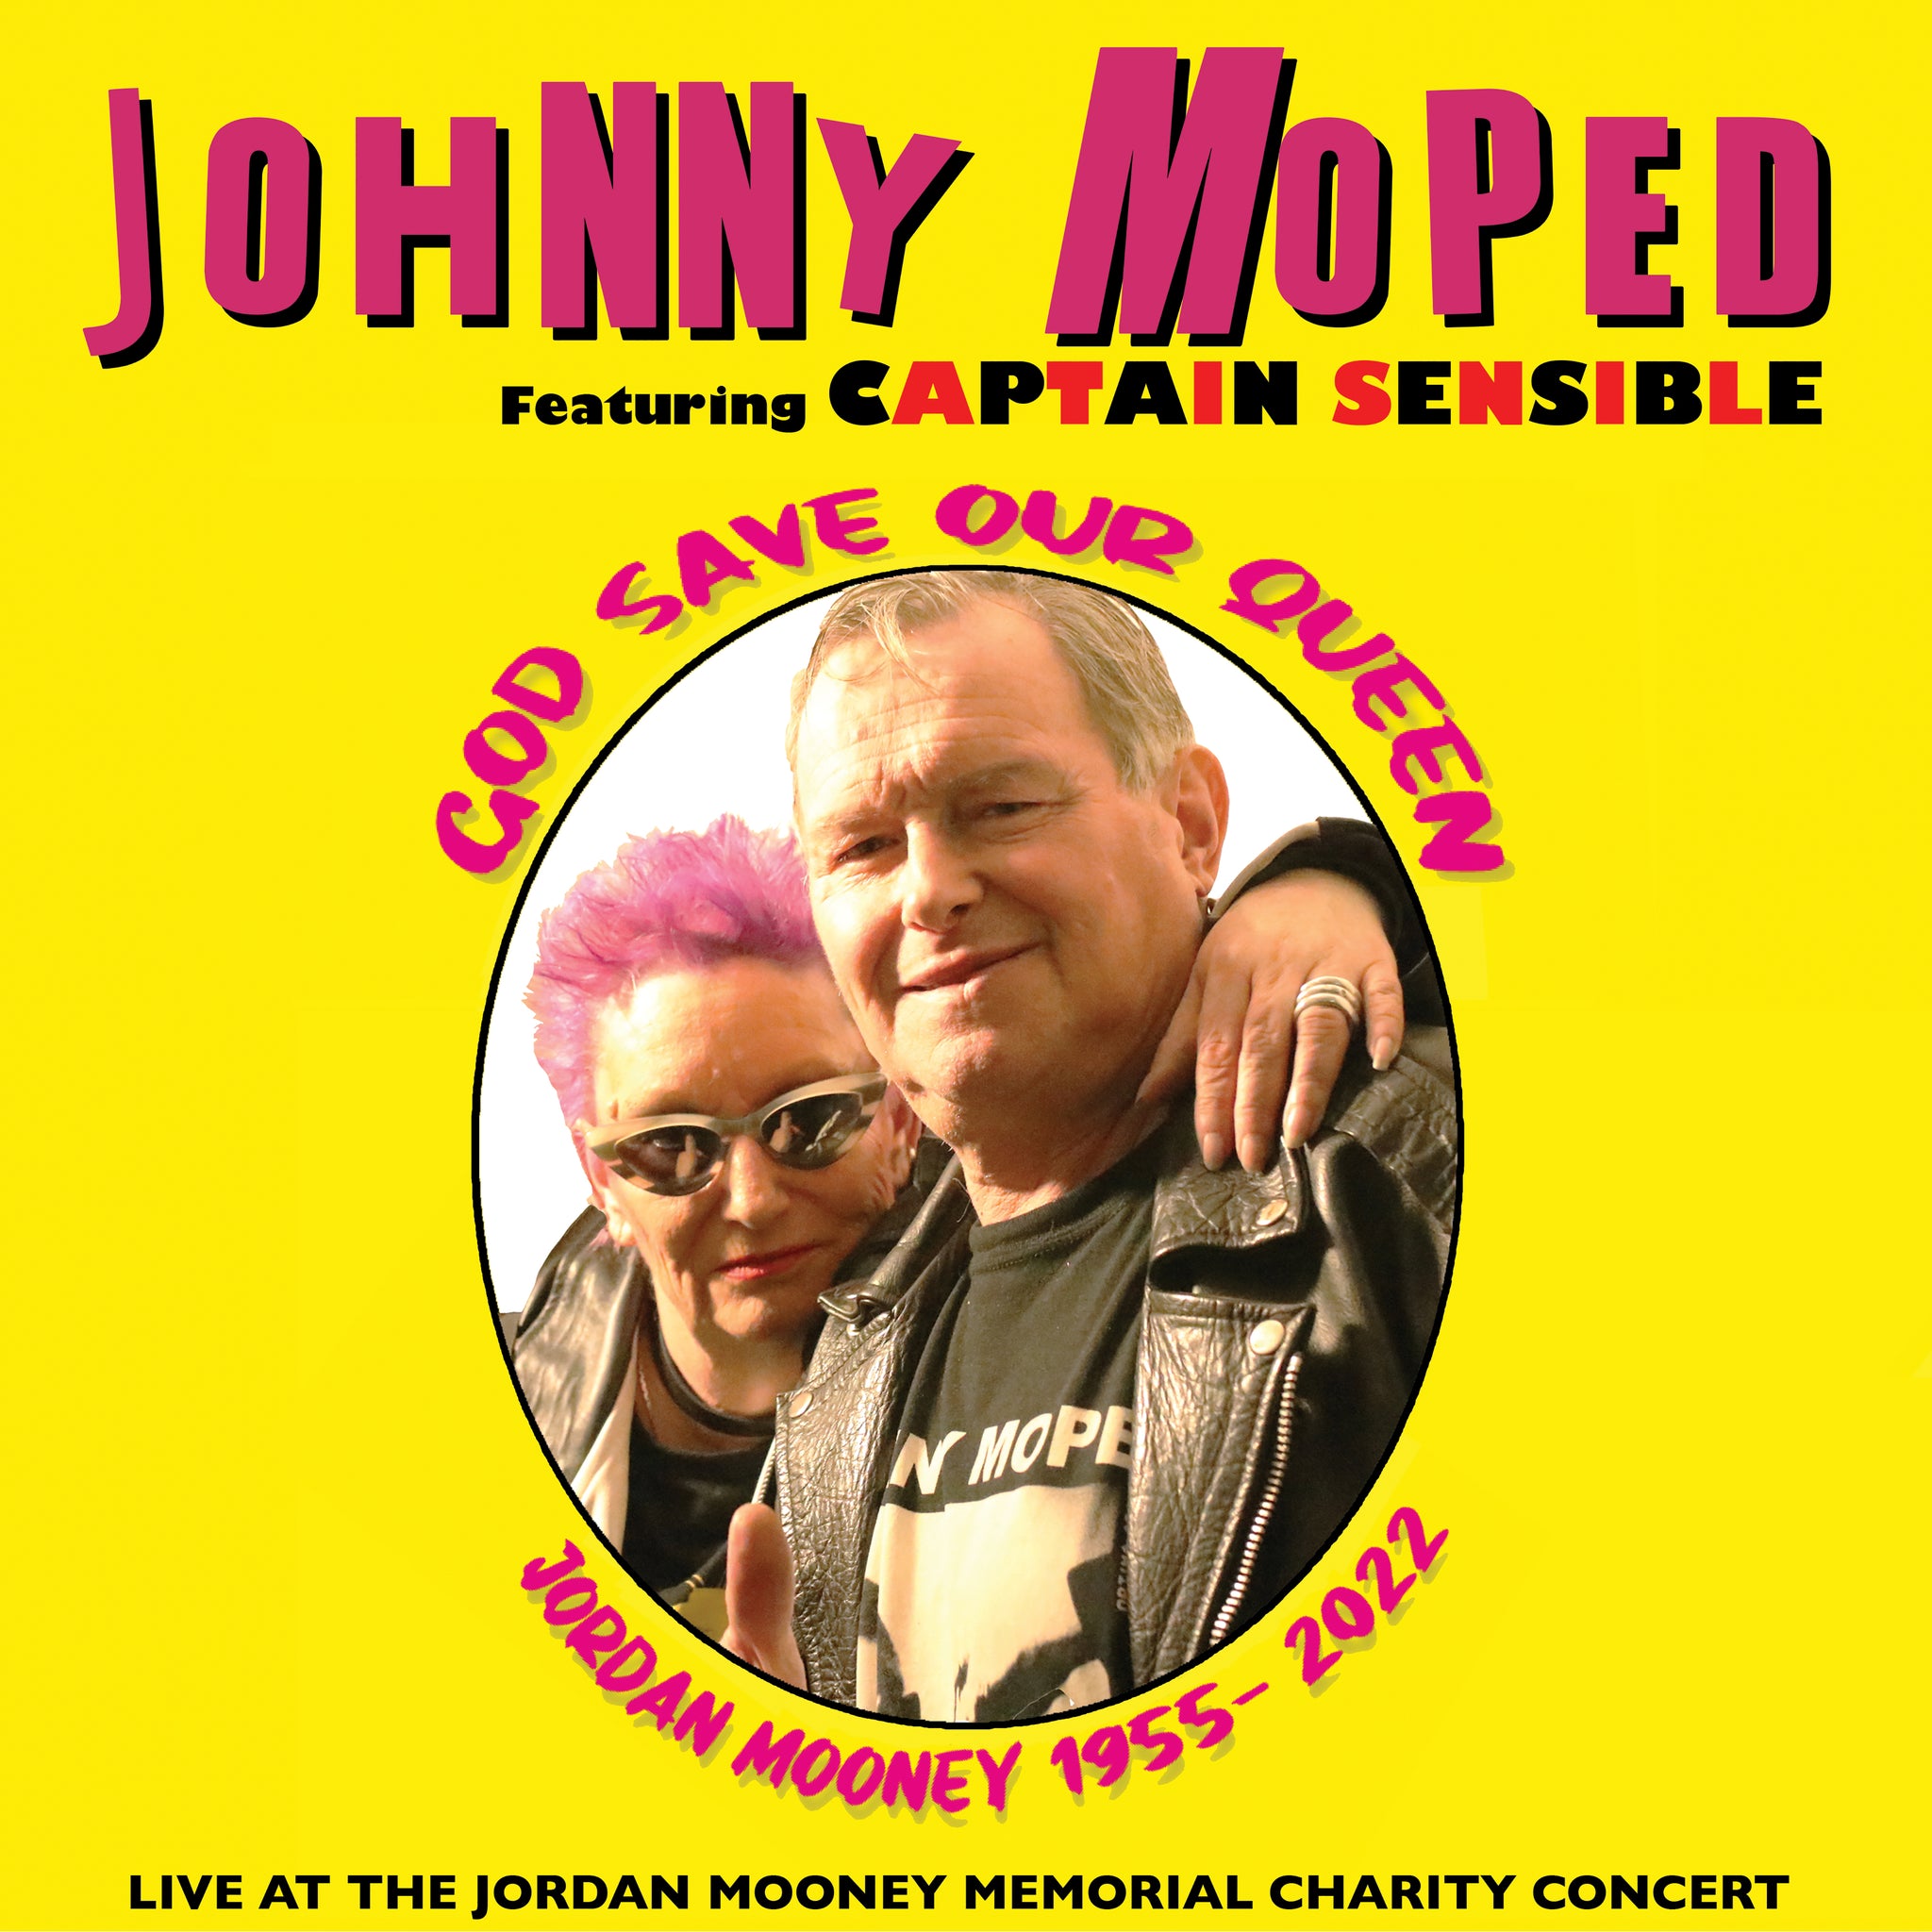 Johnny Moped Featuring Captain Sensible - God Save Our Queen, Jordan Mooney 1955-2022 (Damaged Goods) Col 7"